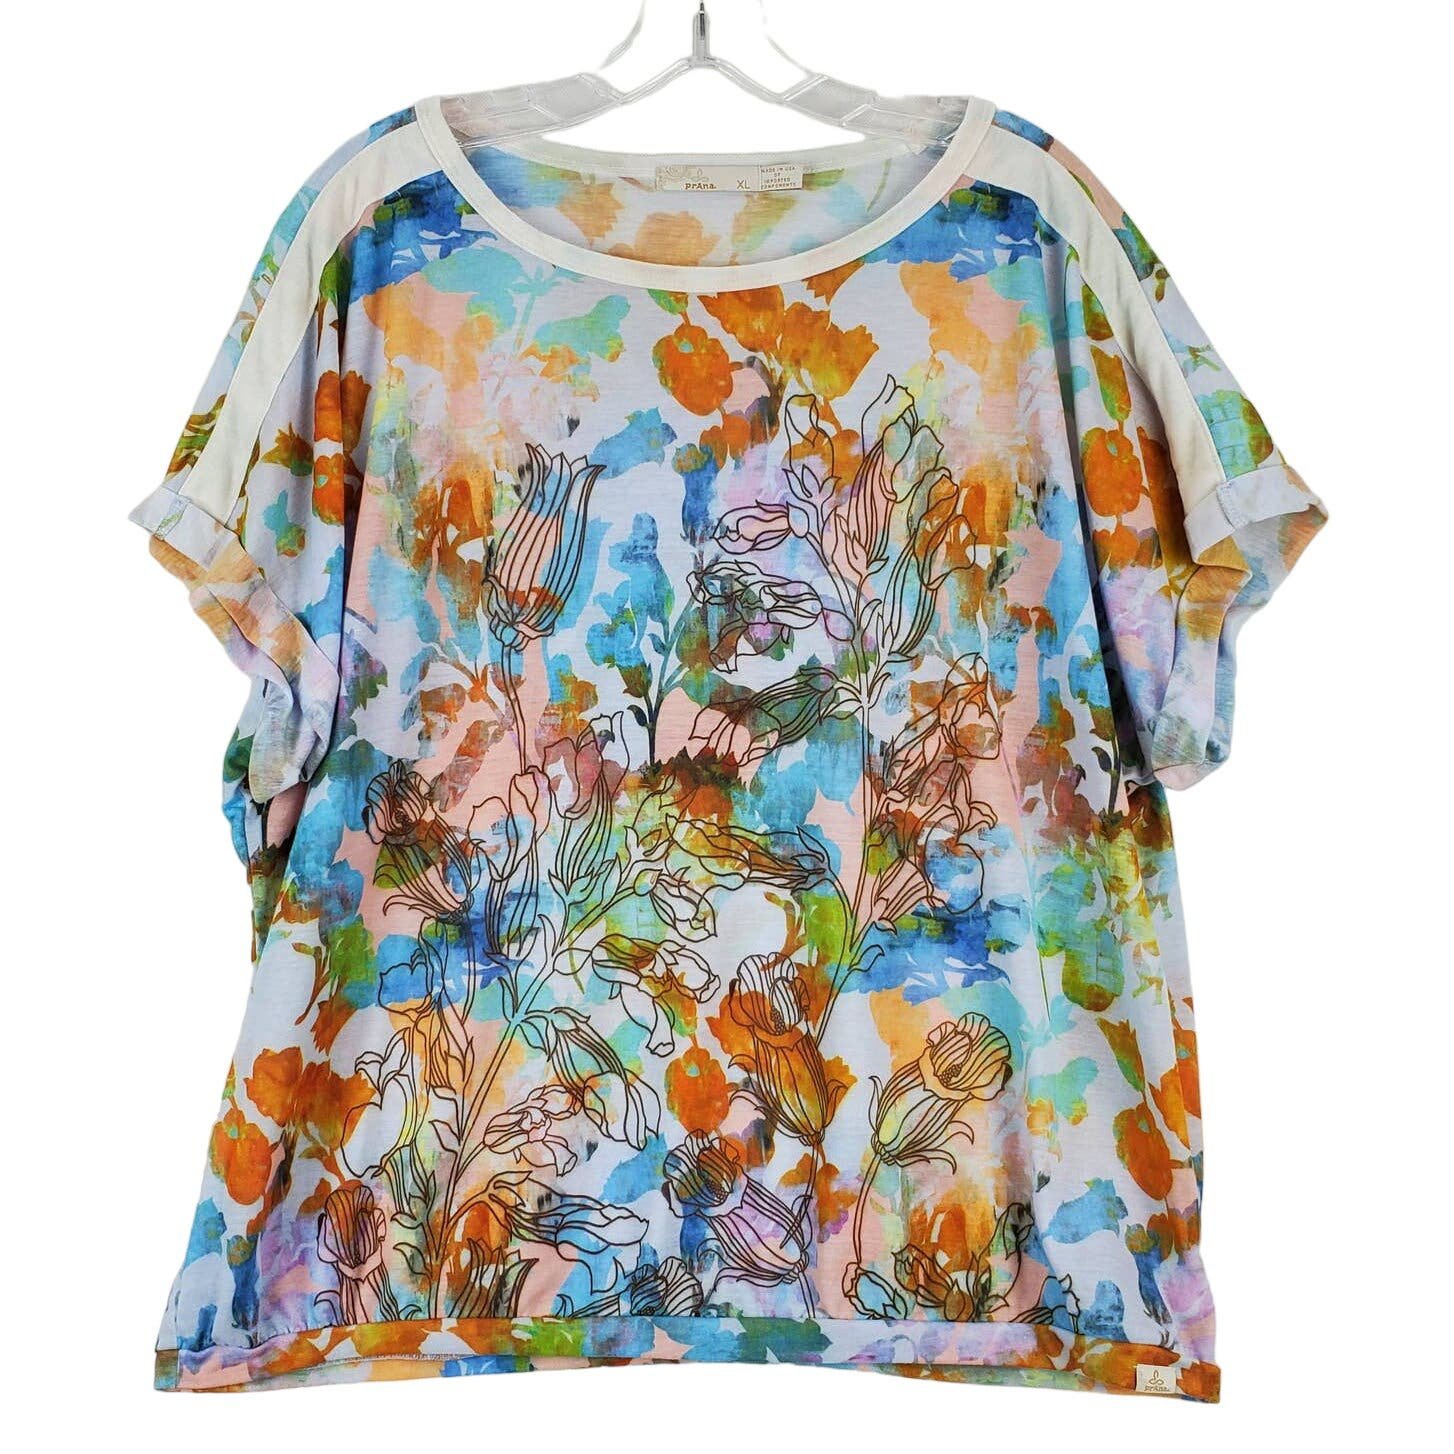 Comfortable Prana Multicolor Floral Top Cuffed Sleeves 